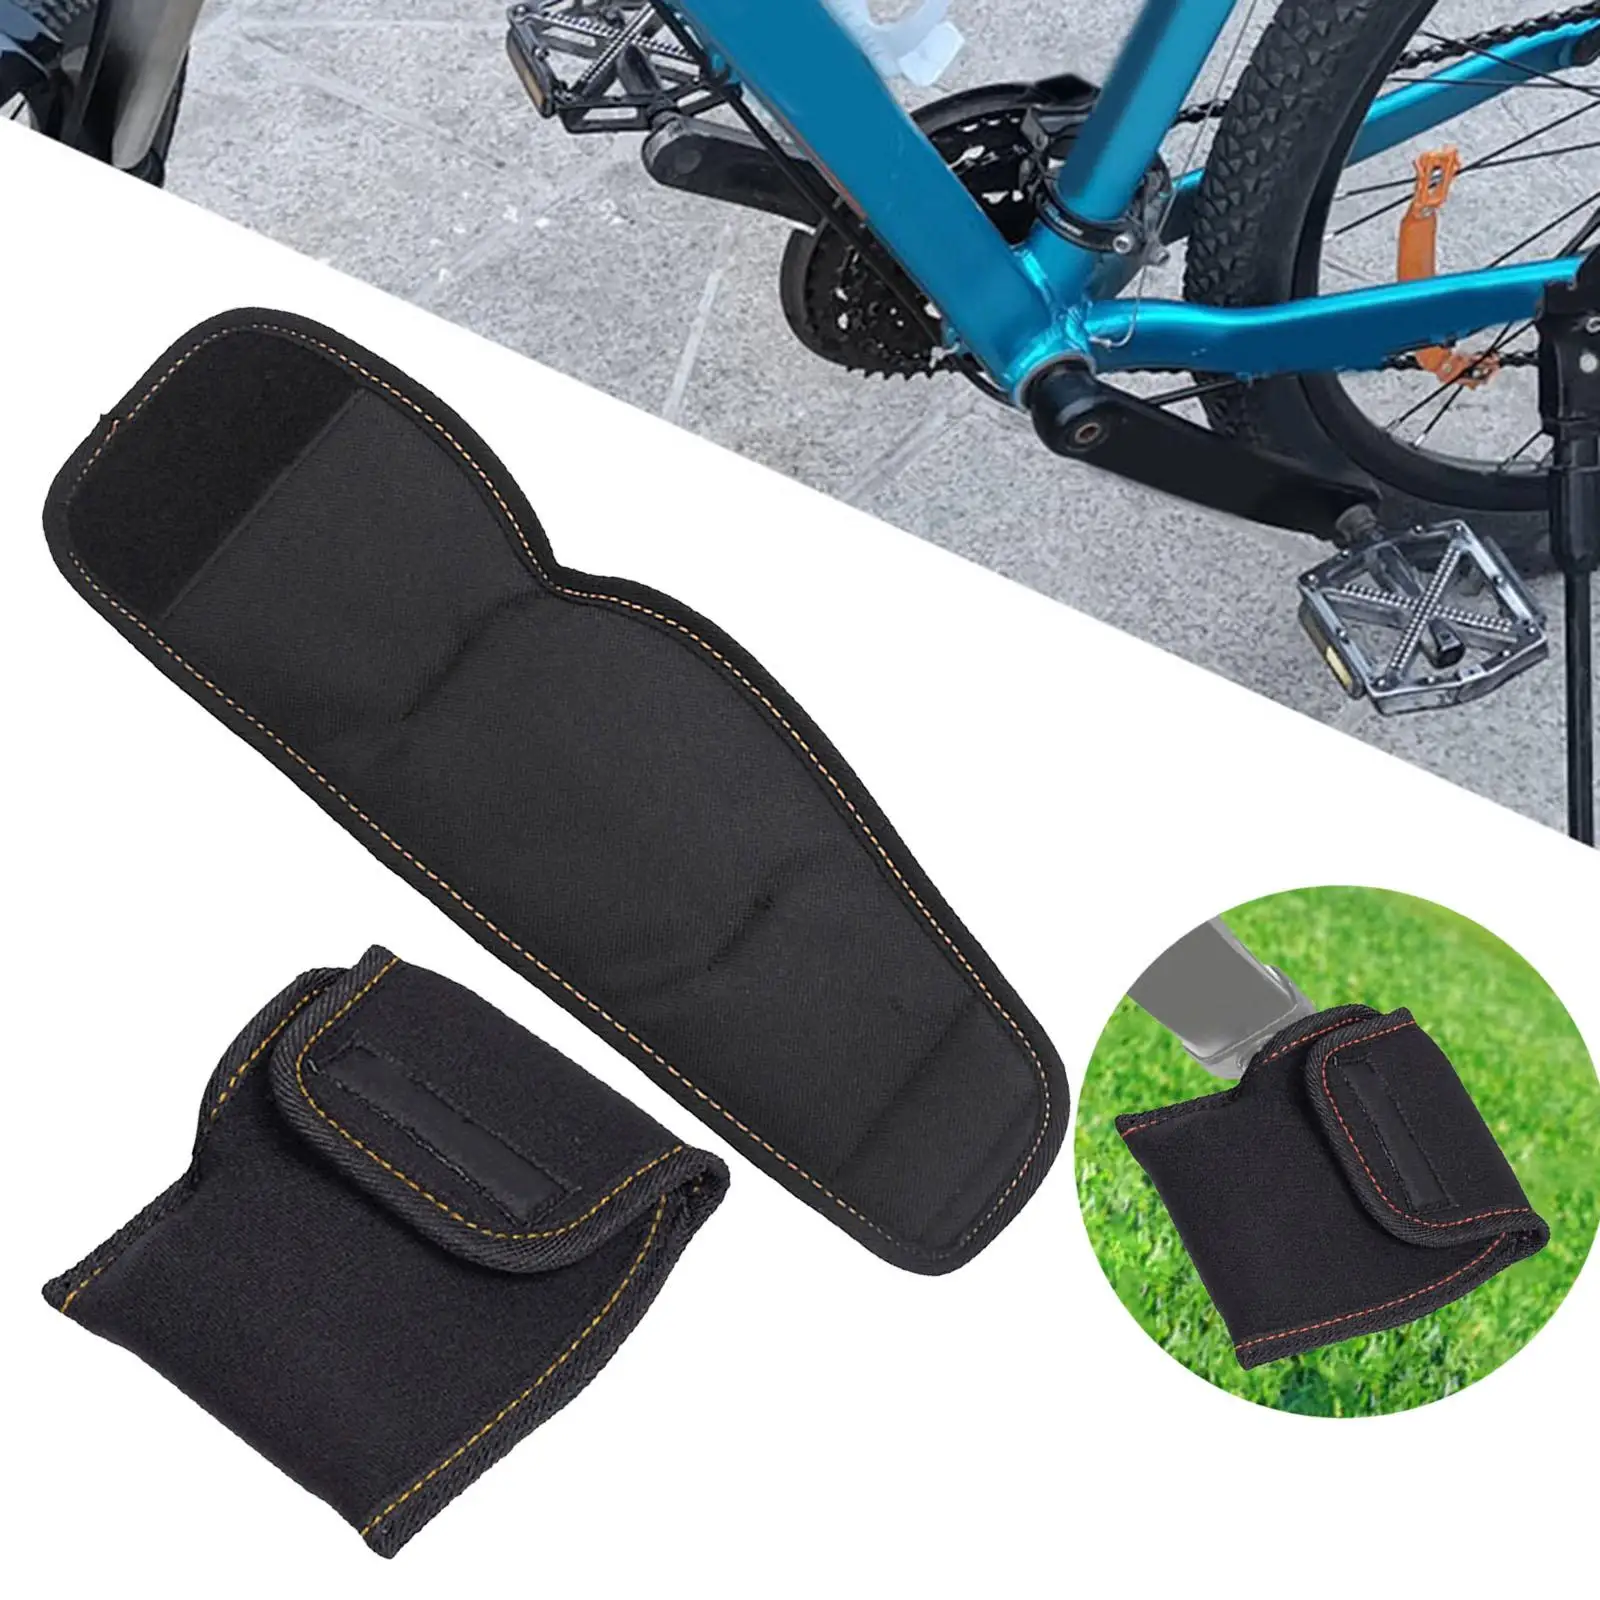 1 Pair Bike Pedal Protective Cover Oxford Cloth Foot Platform Protector Accessories Replacement for Cycling Mountain Road Bike